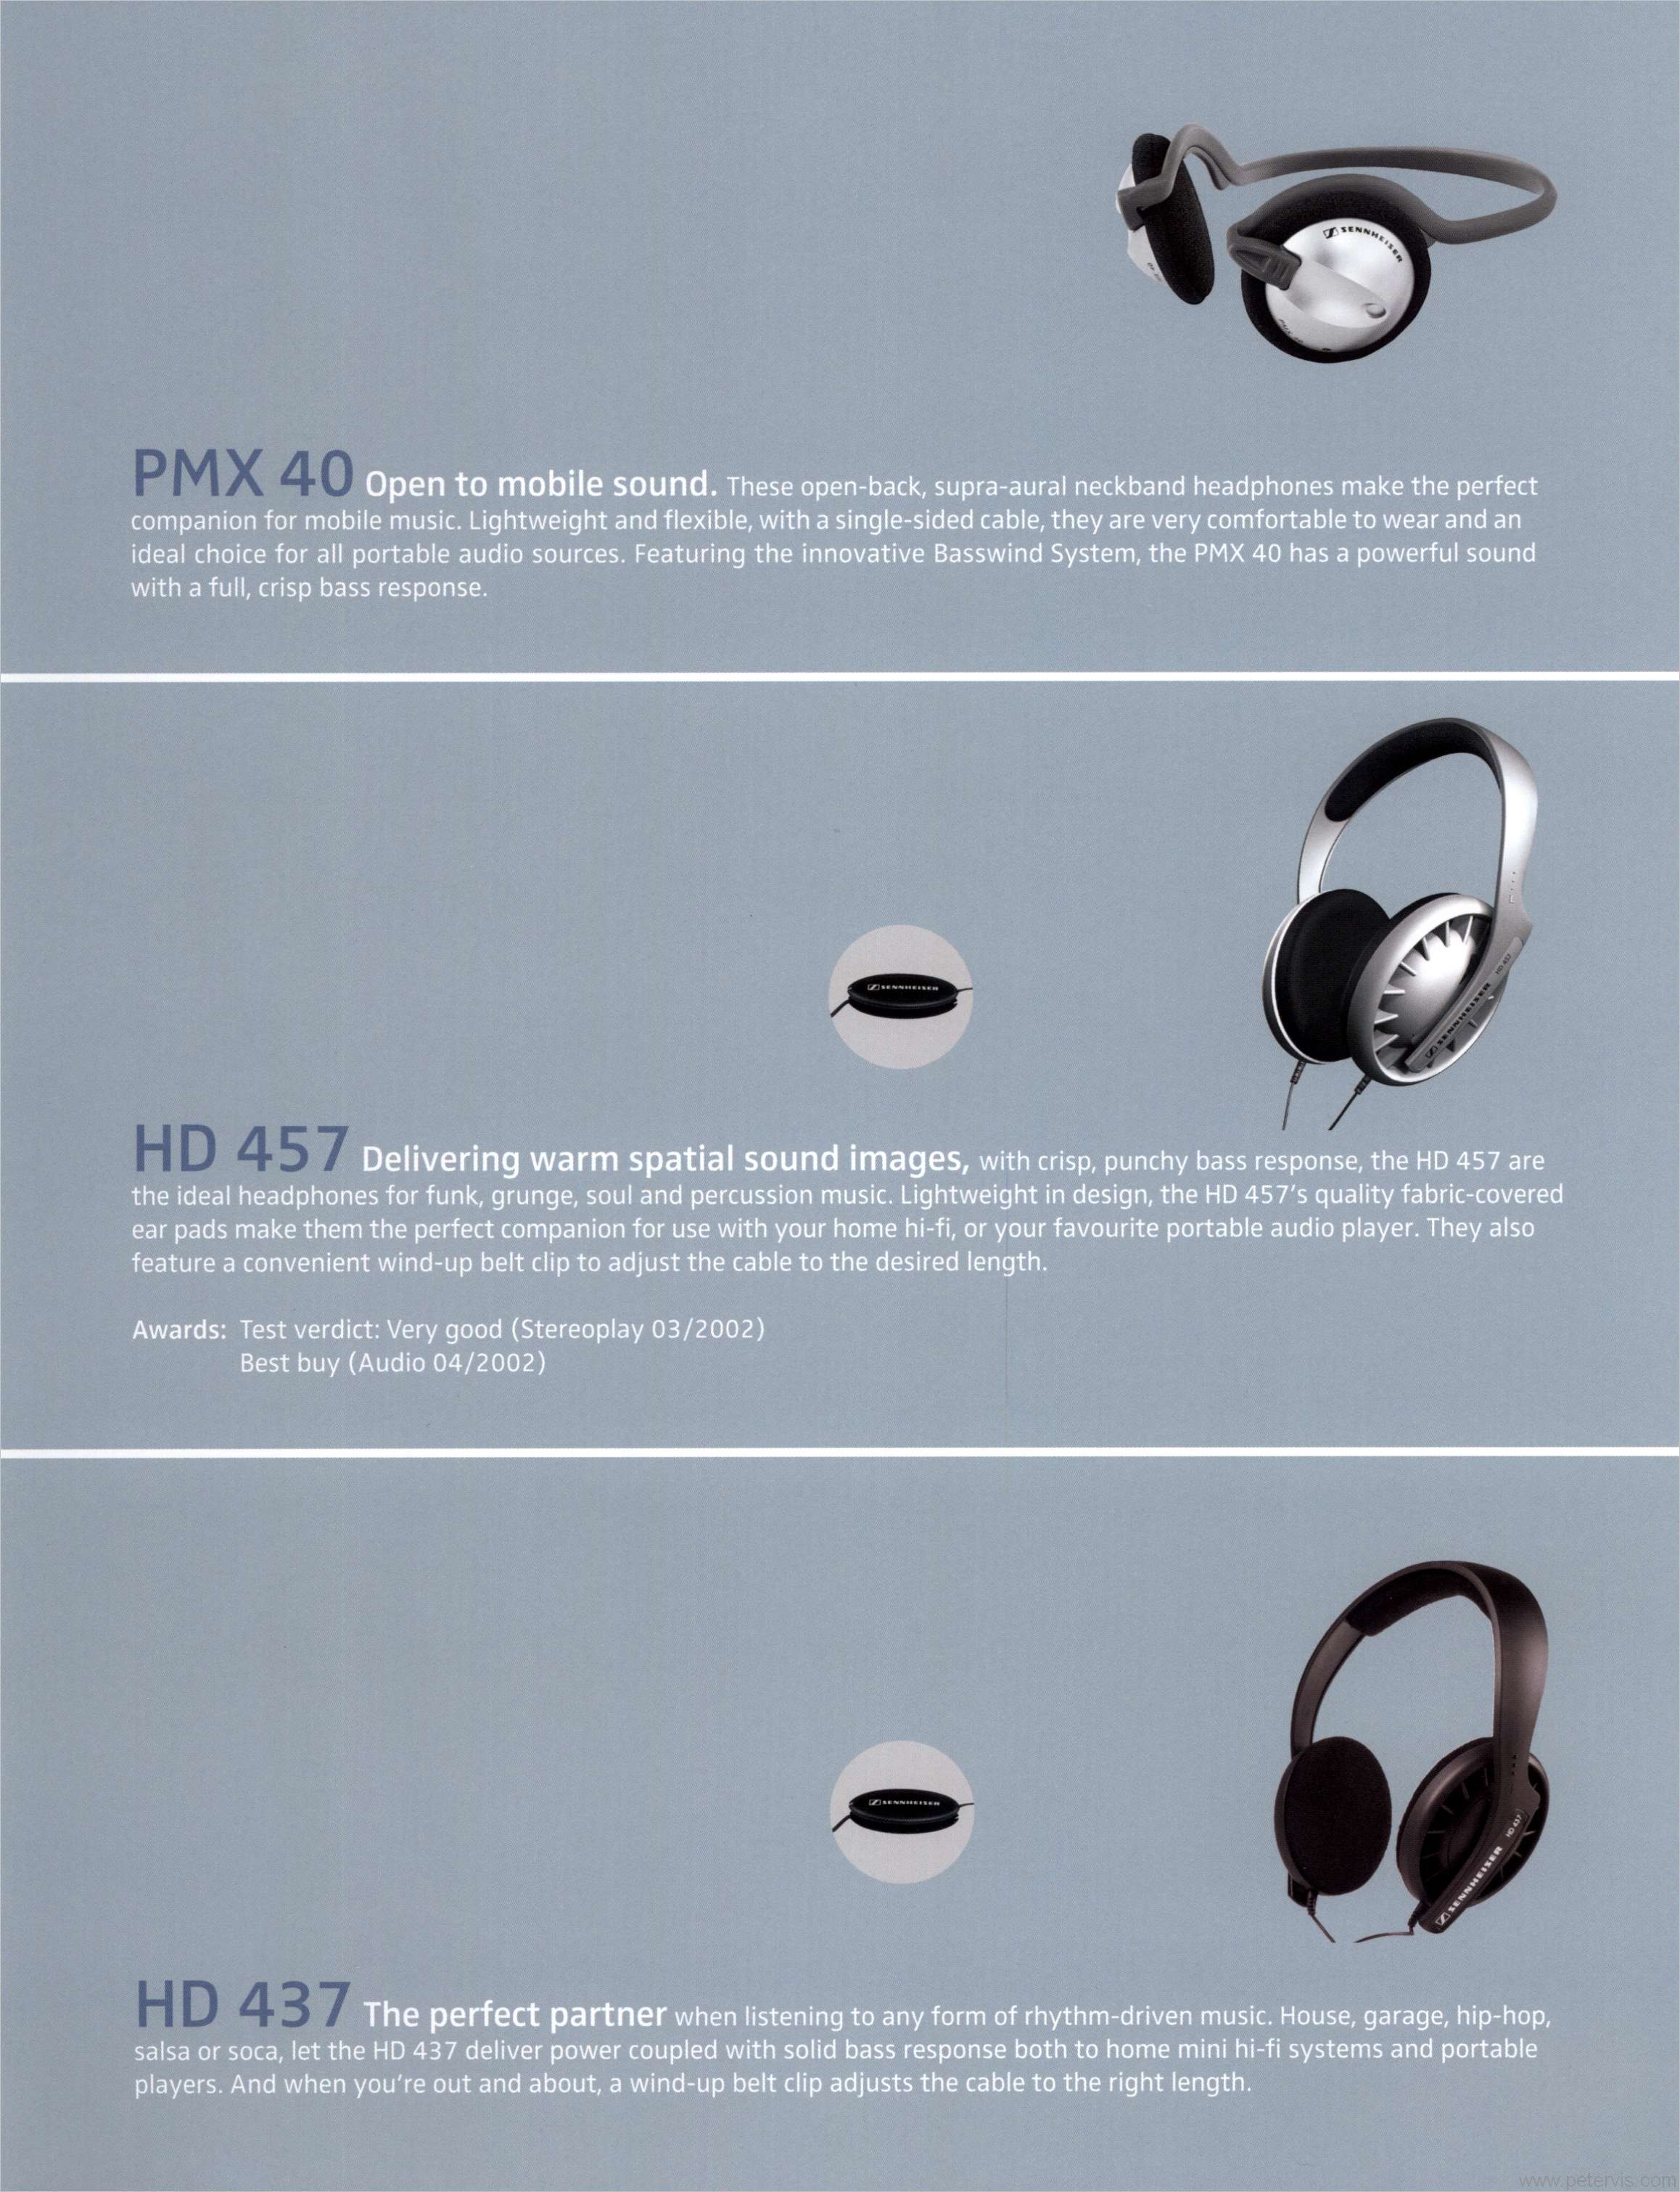 PMX 40 AND HD 457 AND HD 437